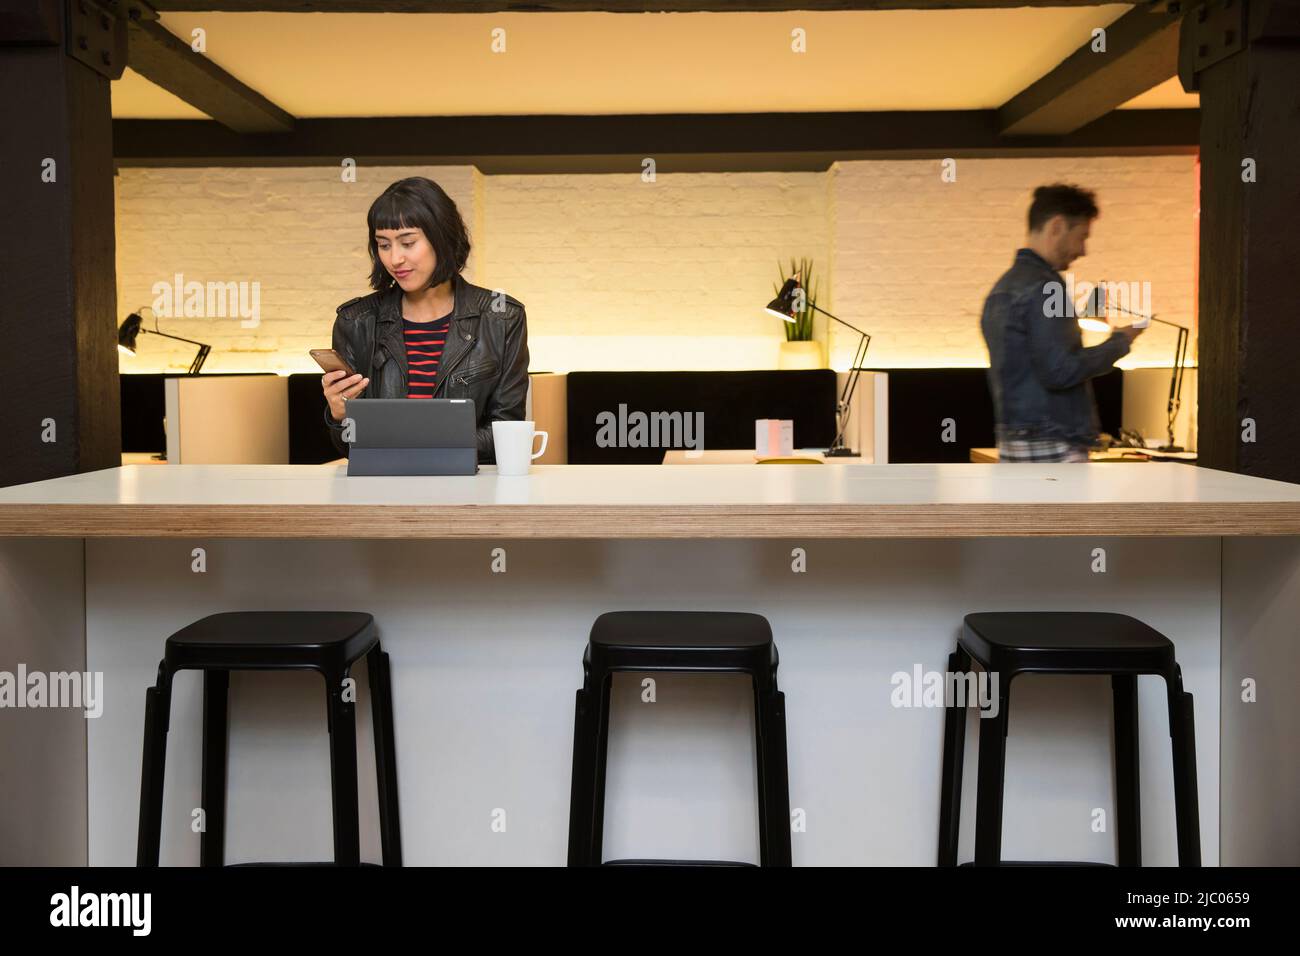 woman sitting at counter checking her phone in co-working space Stock Photo